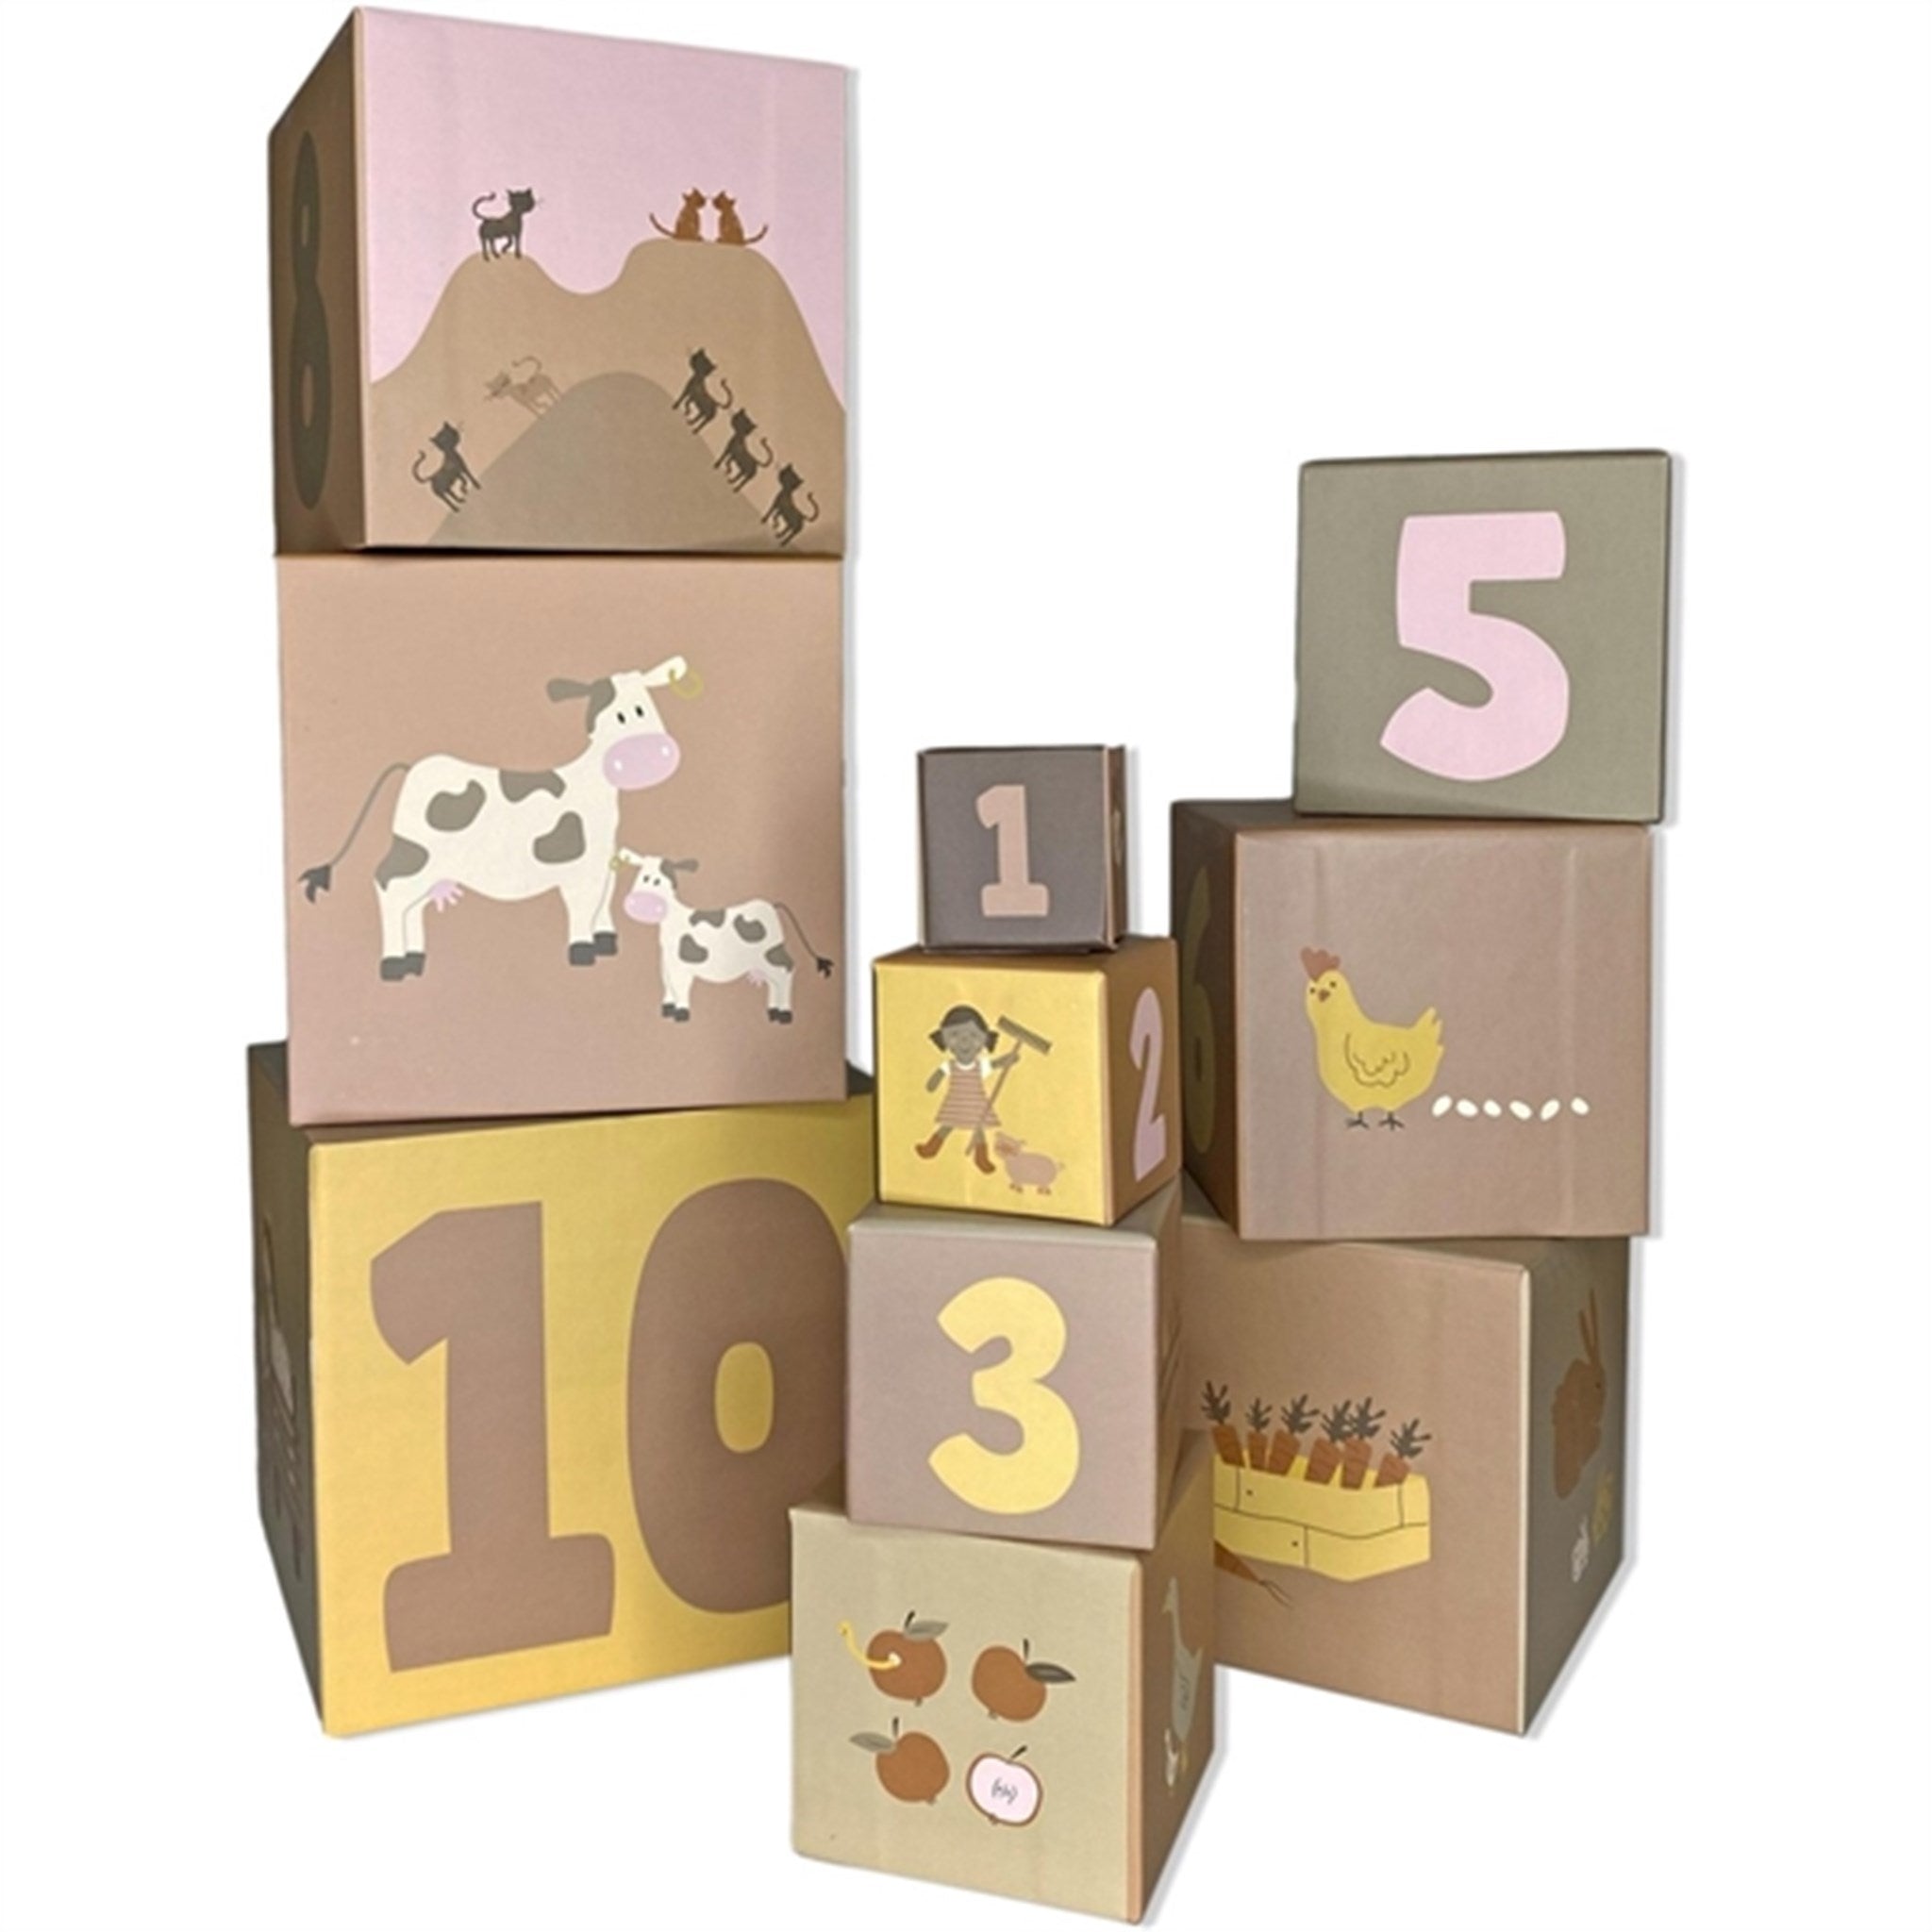 Smallstuff Stacking Boxes 1-10 Farm And Dolls 2